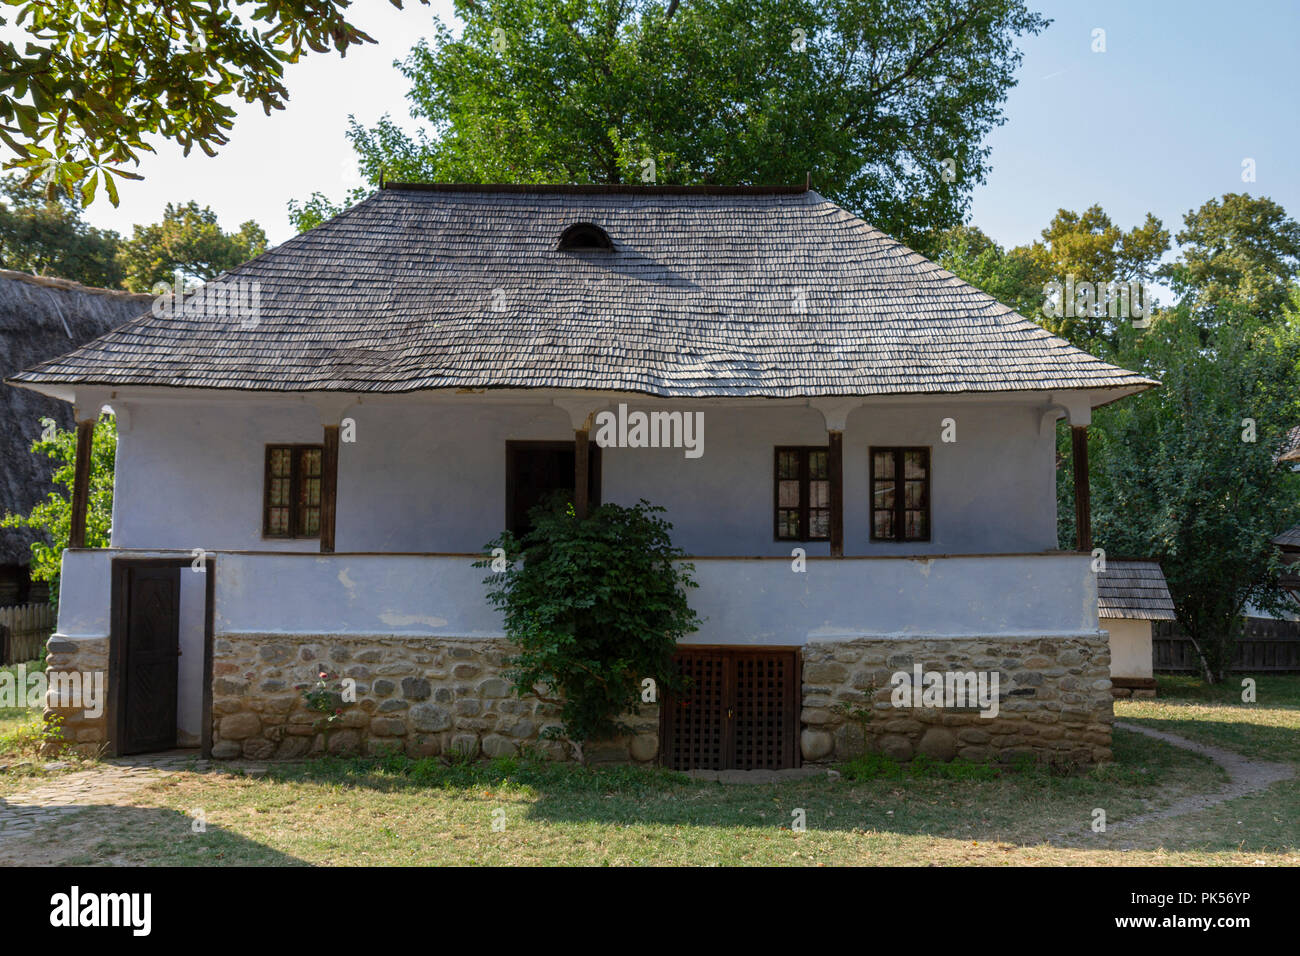 A 19th century house from Stanesti, Arges region in the Dimitrie Gusti National Village Museum in Herăstrău Park, Bucharest, Romania. Stock Photo